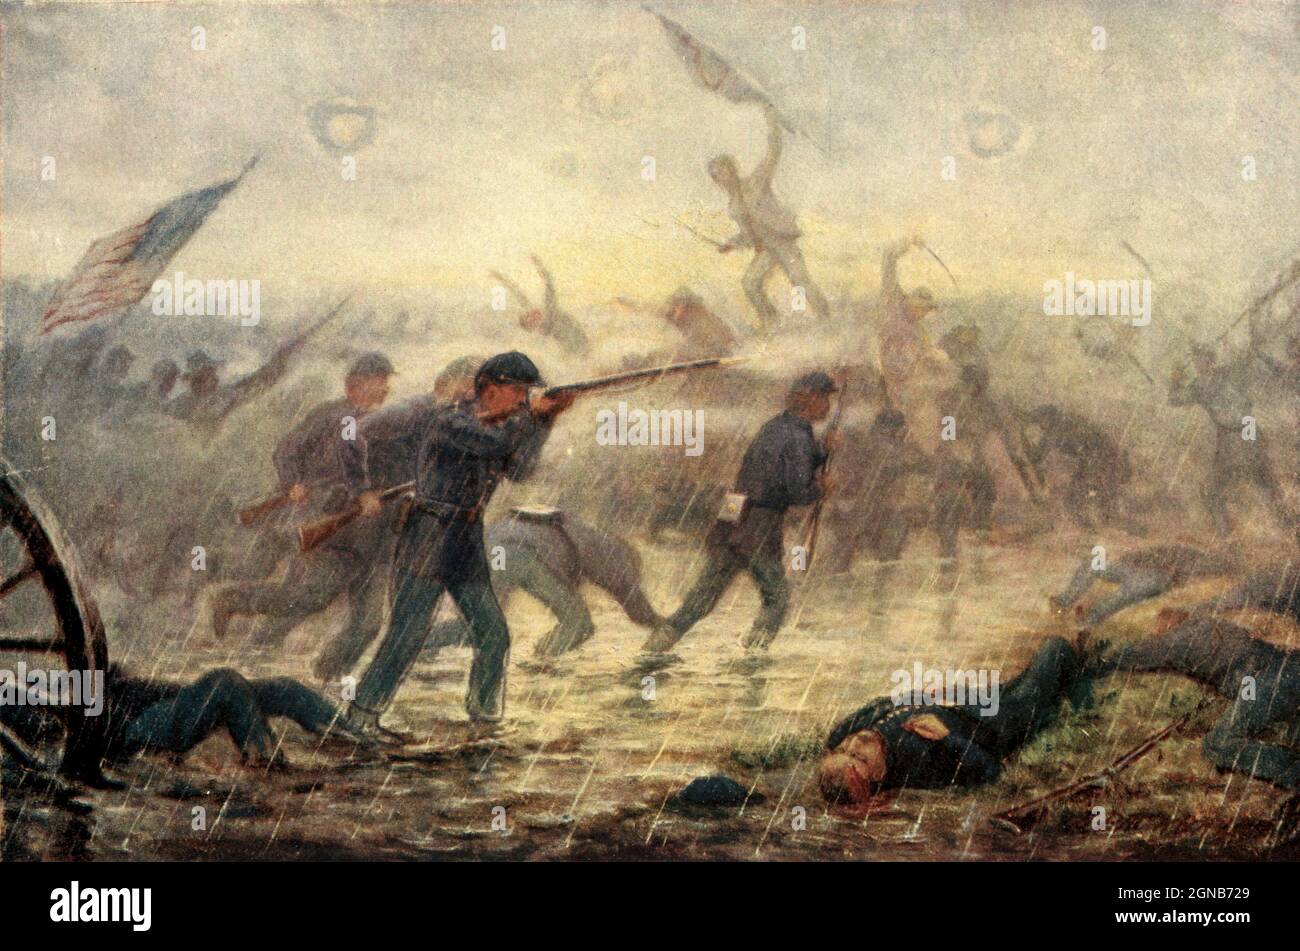 Battle at Spotsylvania, Virginia (Here as Spottsylvania) A battle between the armies of Grant and Lee during the Wilderness Campaign Color artwork painting from the book ' The Civil war through the camera ' hundreds of vivid photographs actually taken in Civil war times, sixteen reproductions in color of famous war paintings. The new text history by Henry W. Elson. A. complete illustrated history of the Civil war Stock Photo